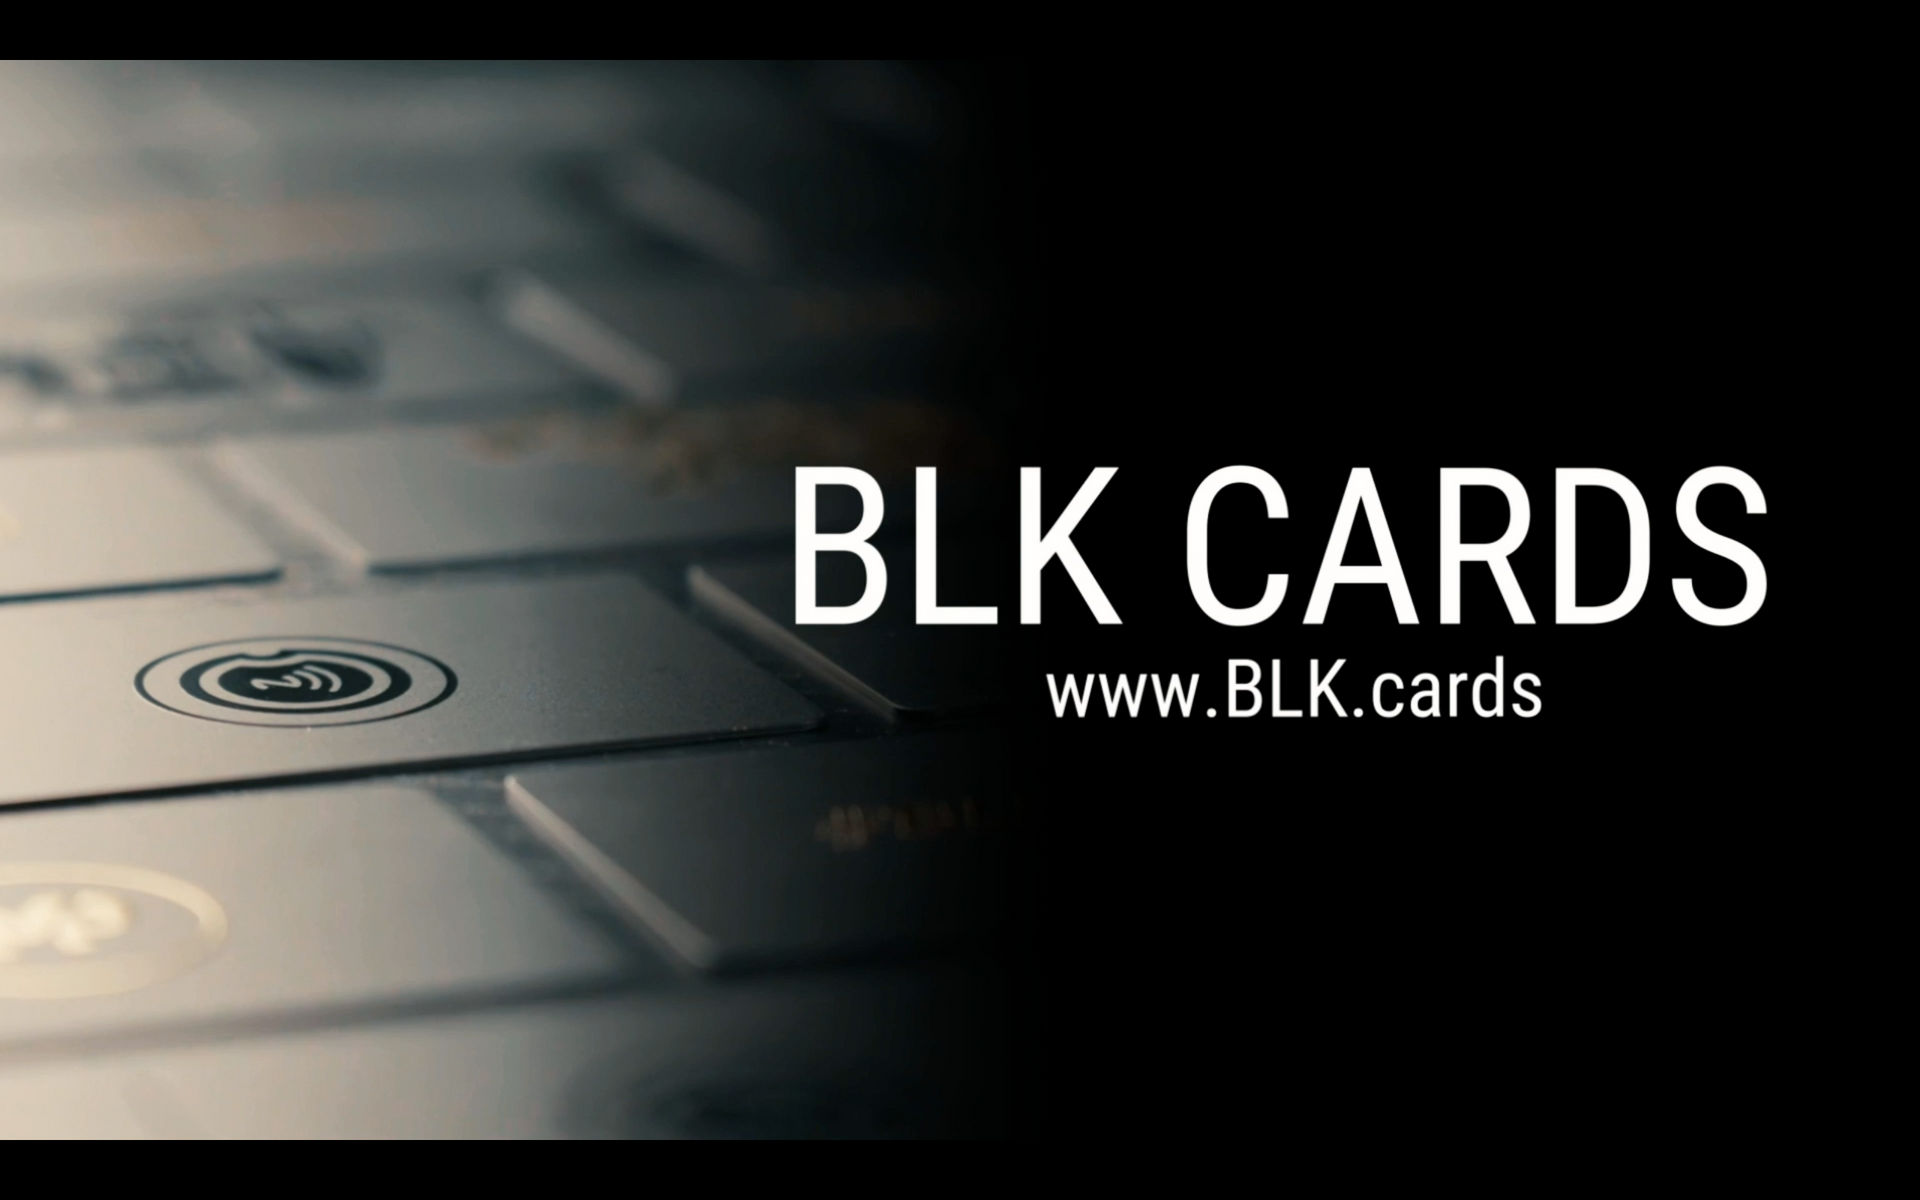 Load video: BLK cards Promo video